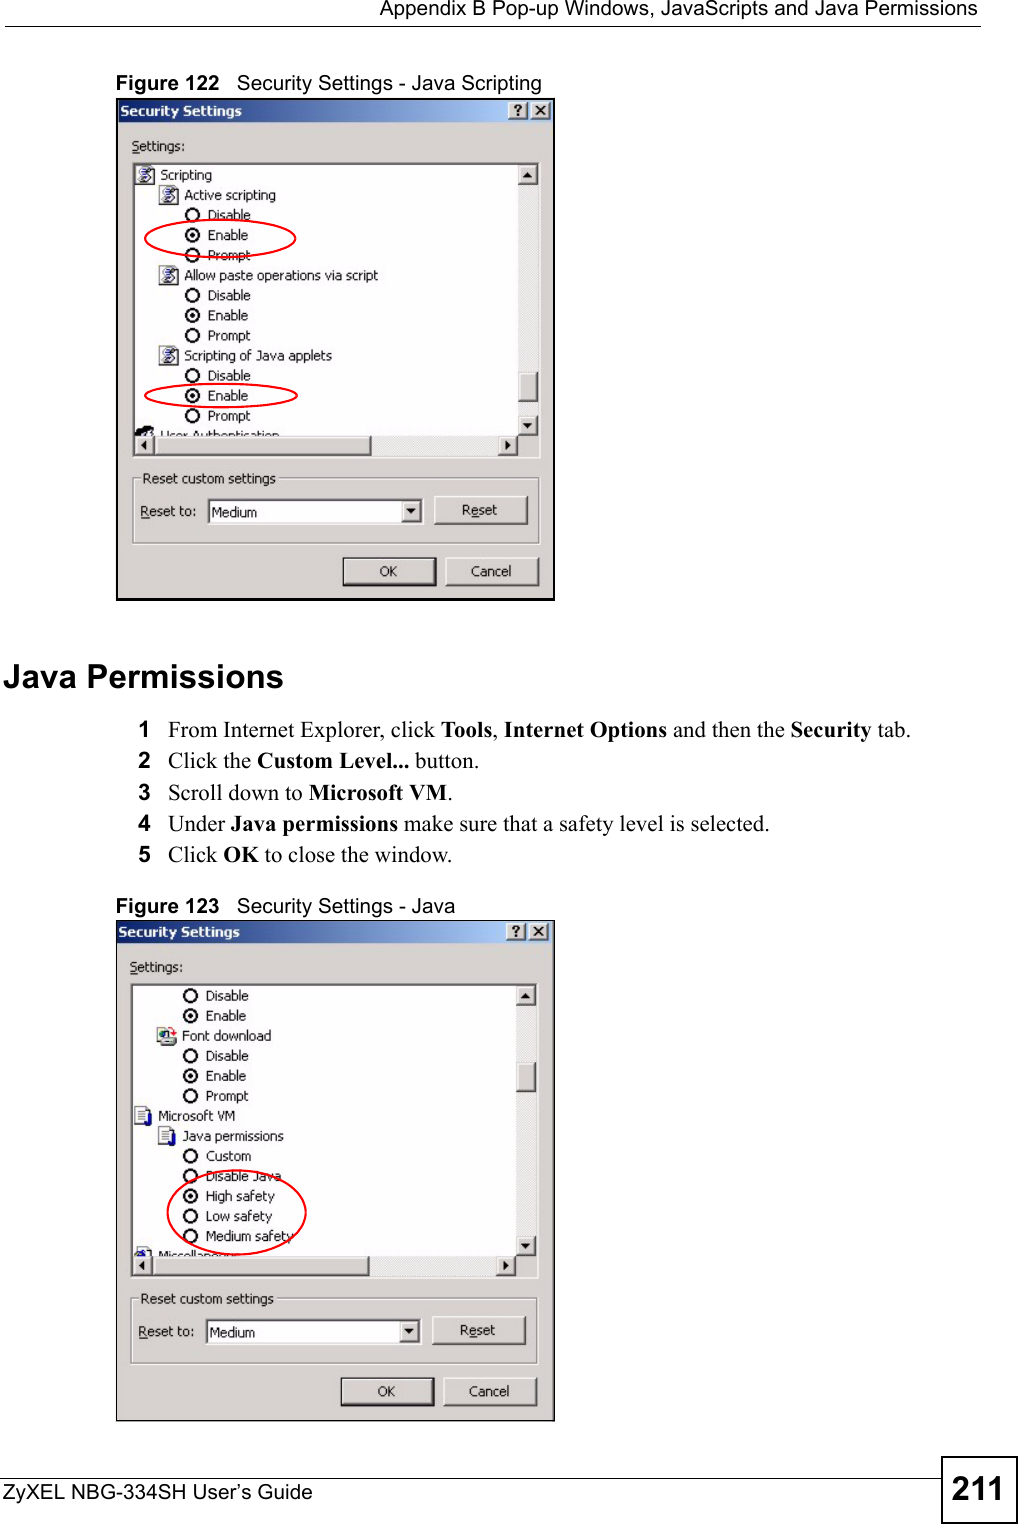  Appendix B Pop-up Windows, JavaScripts and Java PermissionsZyXEL NBG-334SH User’s Guide 211Figure 122   Security Settings - Java ScriptingJava Permissions1From Internet Explorer, click Tools, Internet Options and then the Security tab. 2Click the Custom Level... button. 3Scroll down to Microsoft VM. 4Under Java permissions make sure that a safety level is selected.5Click OK to close the window.Figure 123   Security Settings - Java 